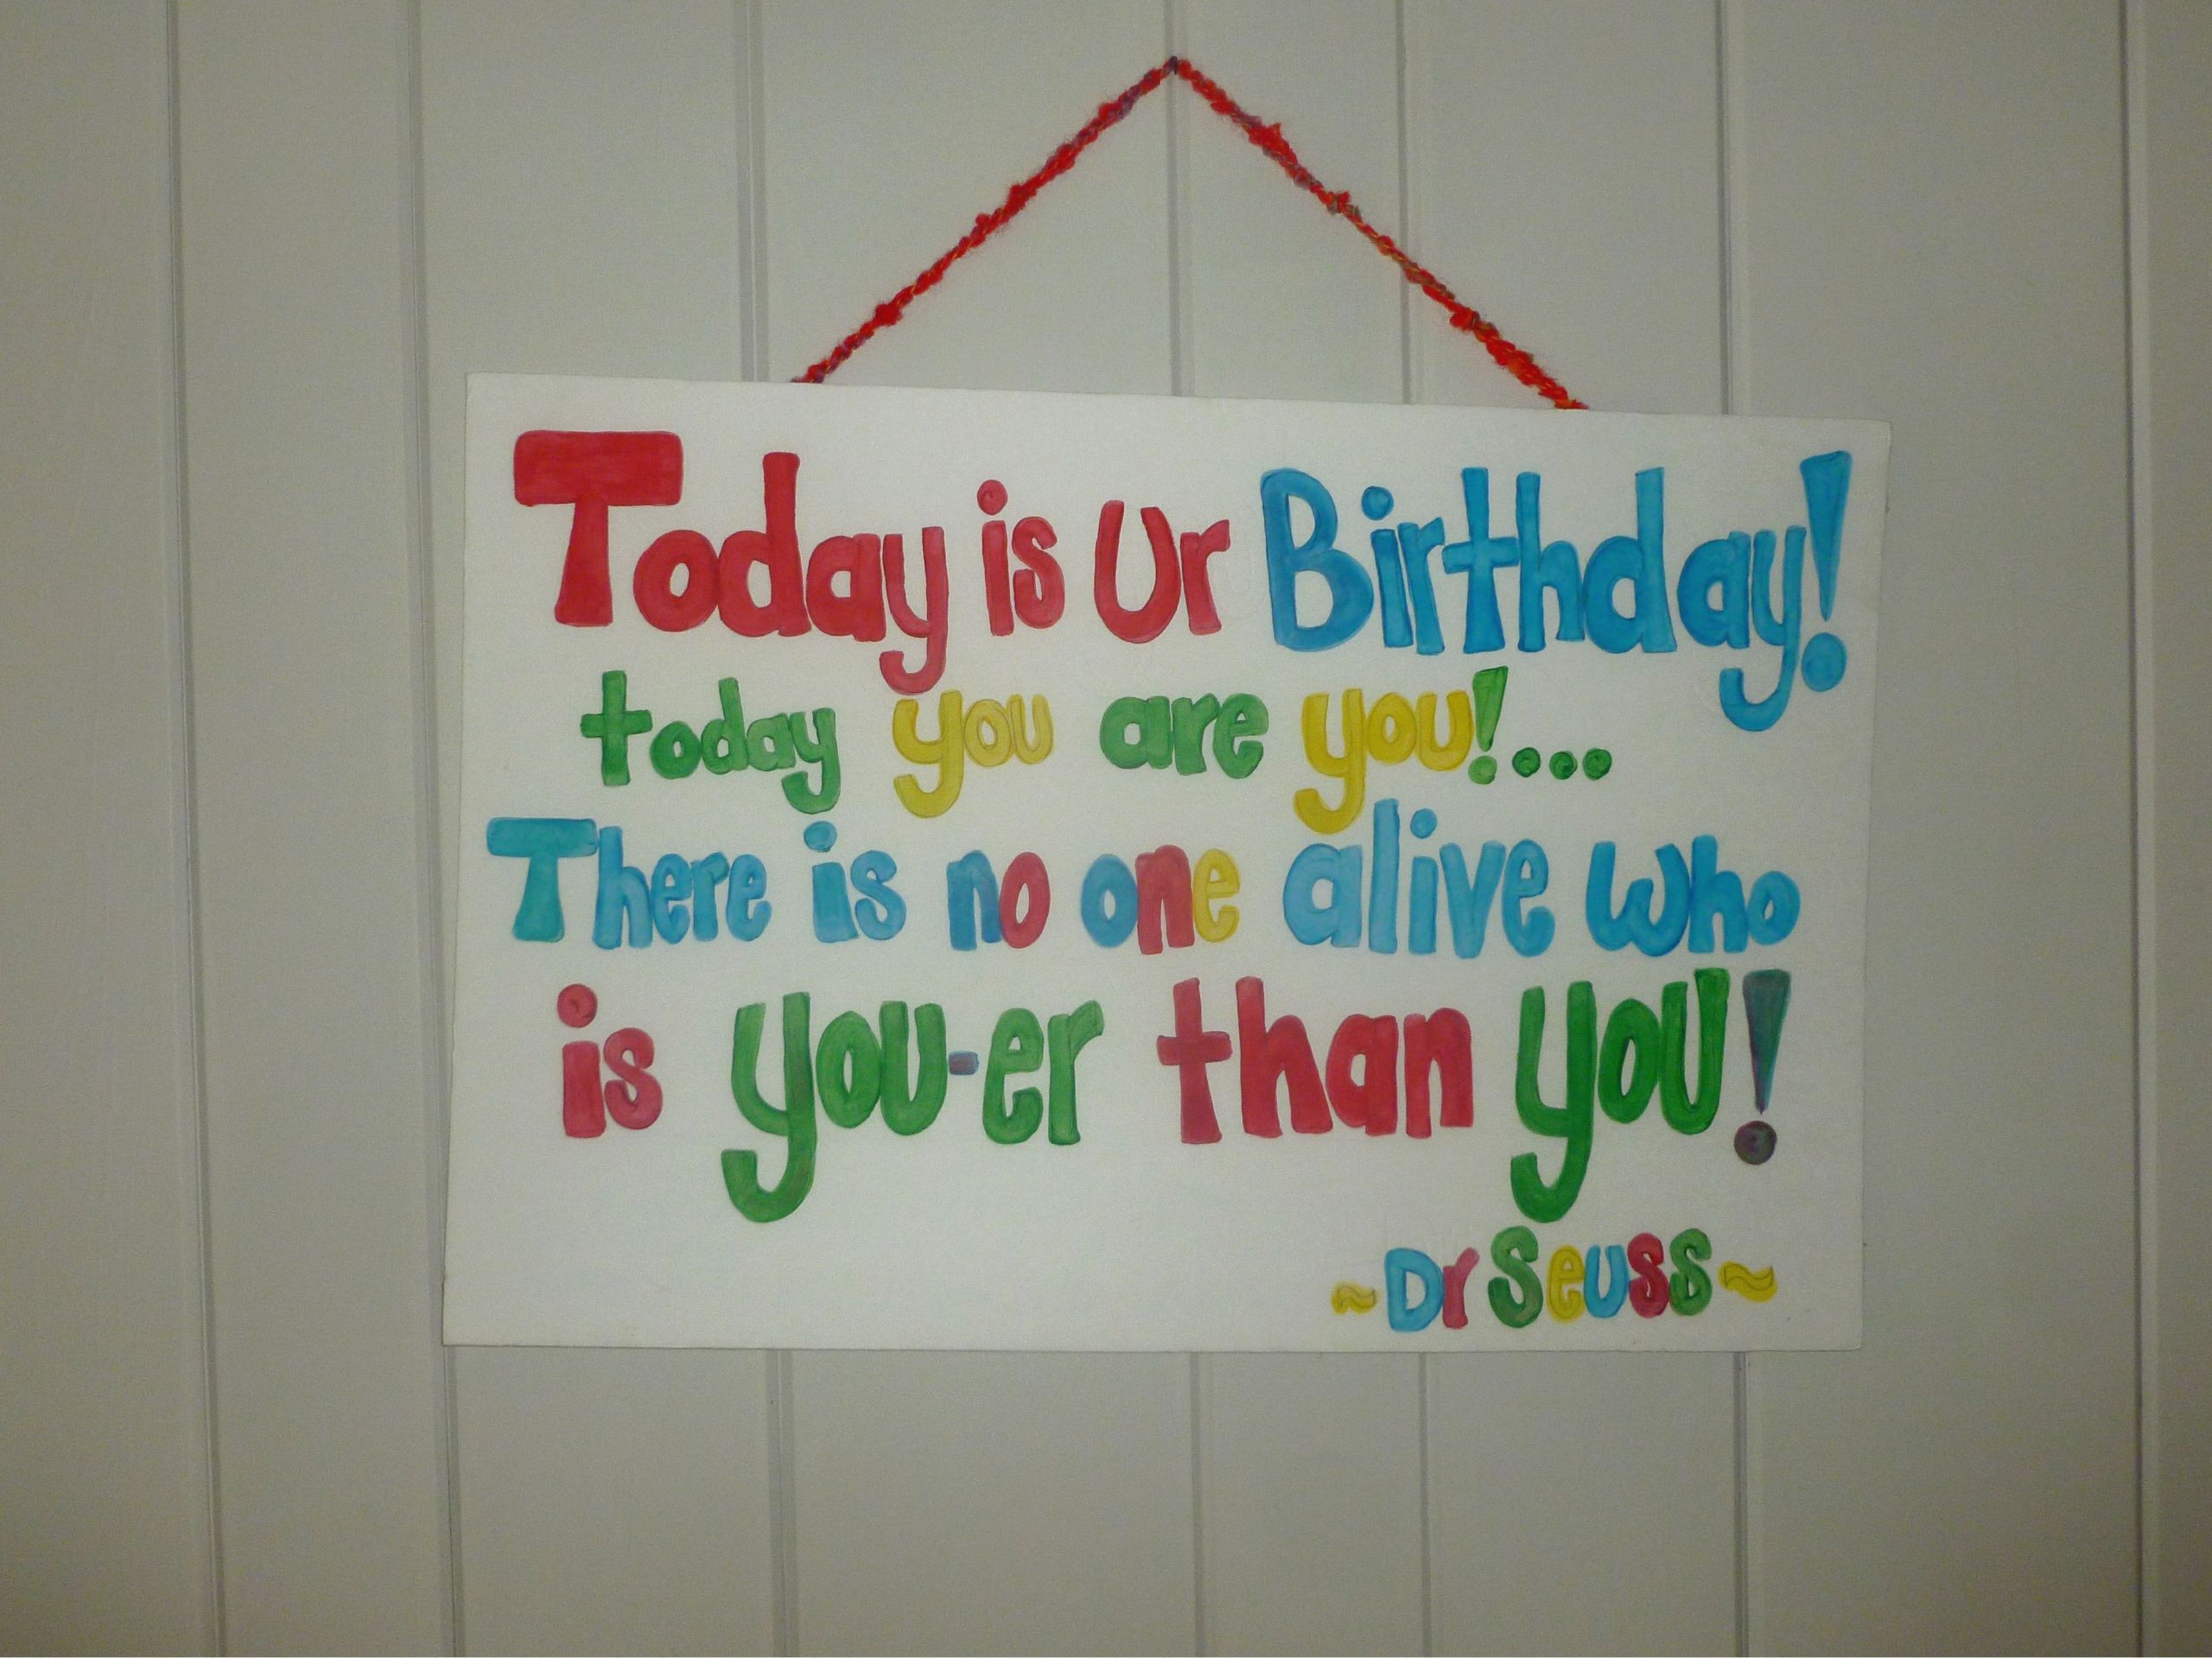 Dr Suess Birthday Quotes
 Dr Seuss birthday poem My Creations